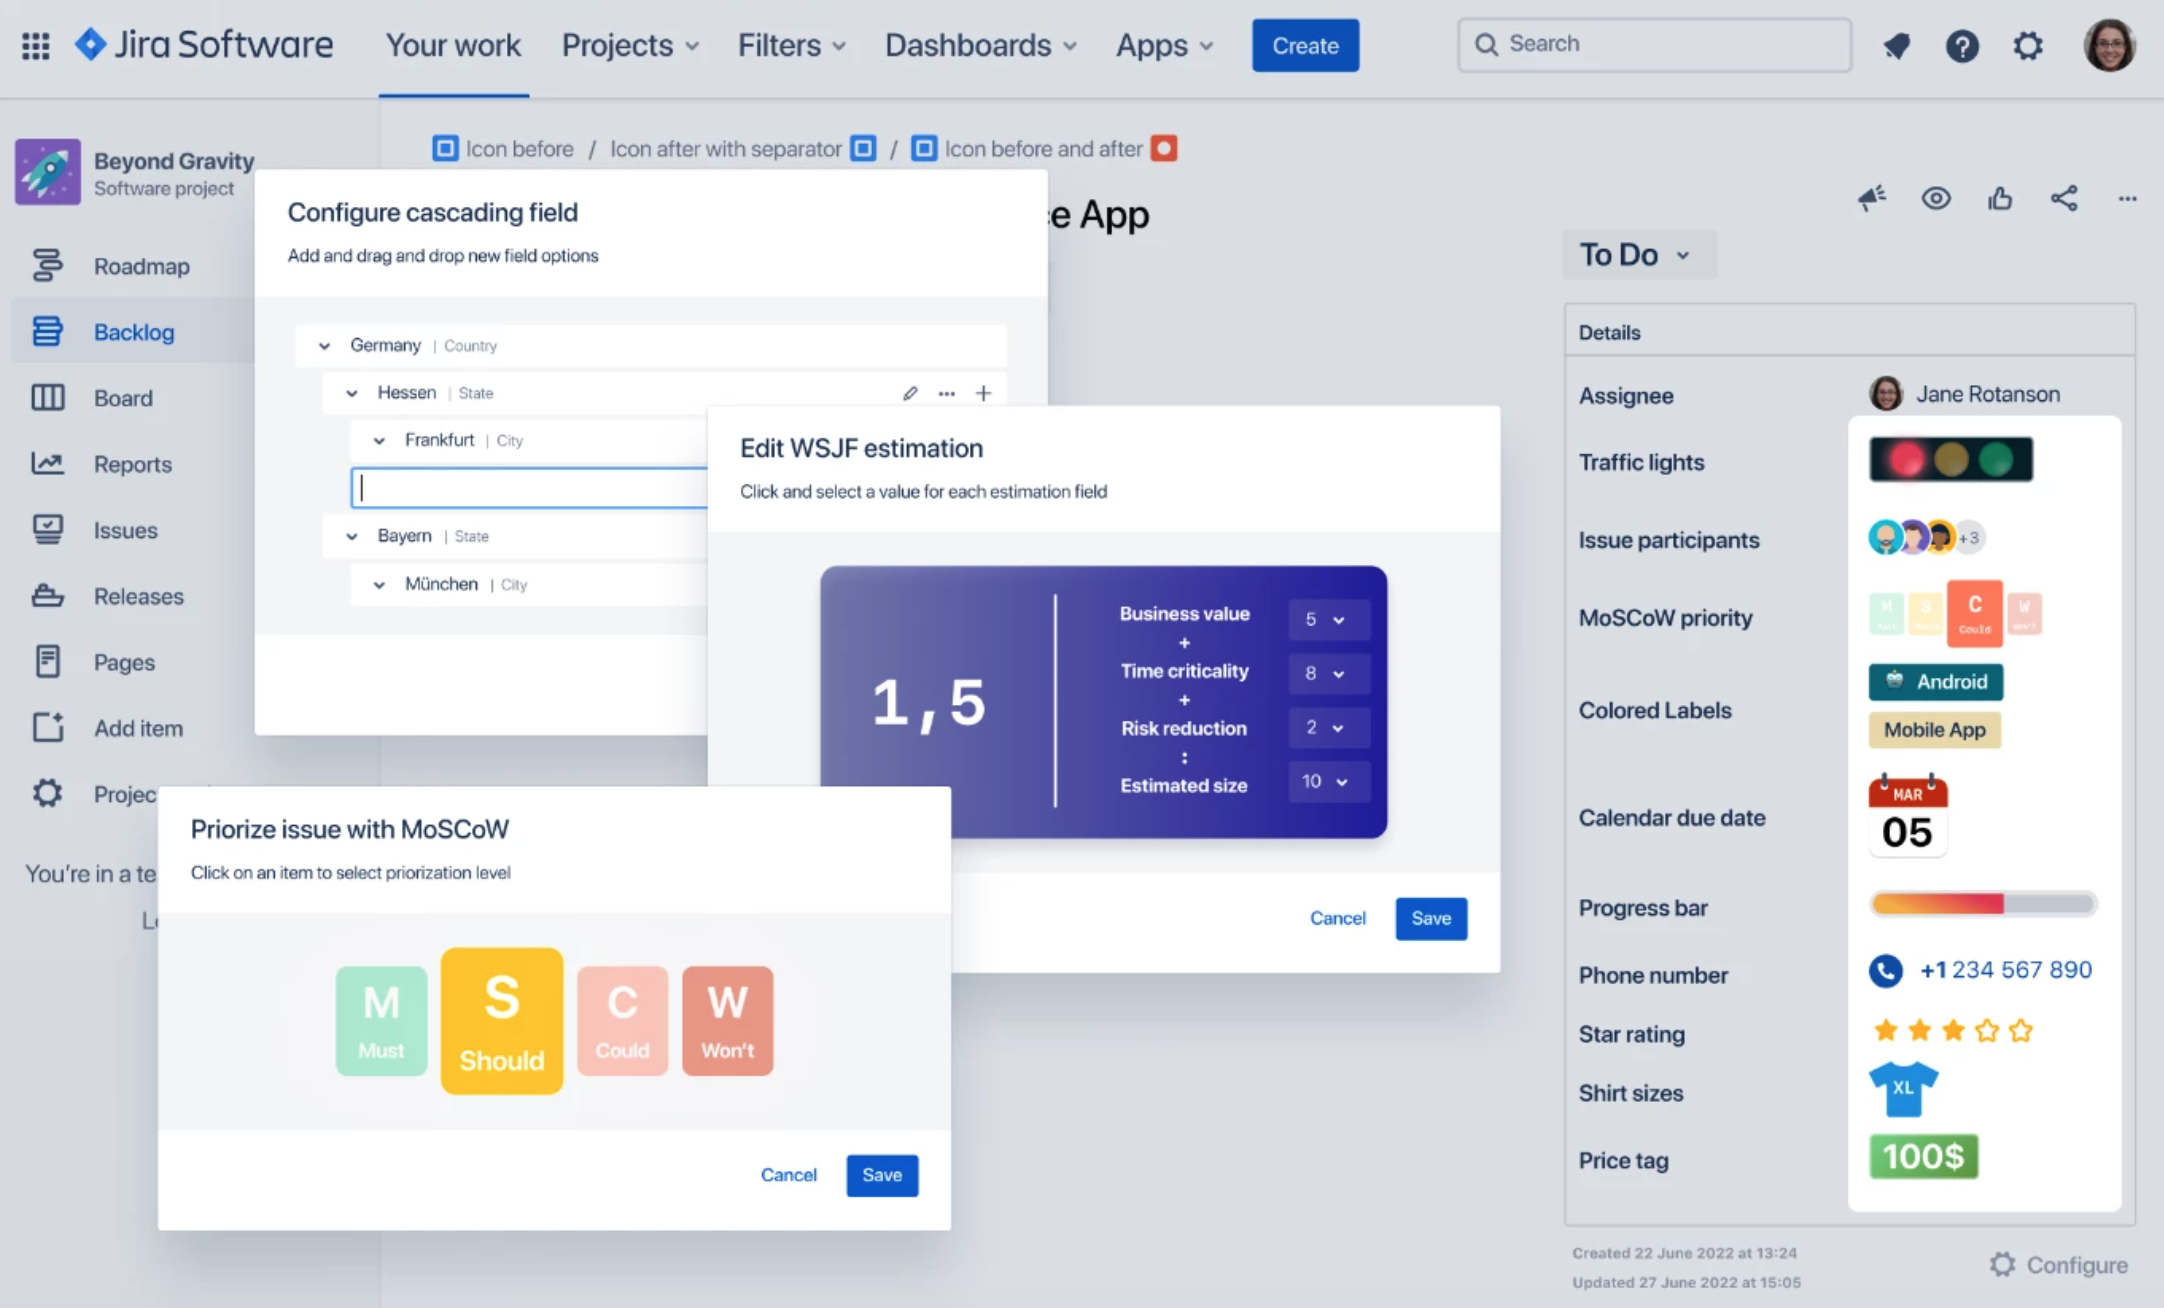 Awesome Custom Fields: An important Jira feature has become more accessible and understandable - collage of different use cases